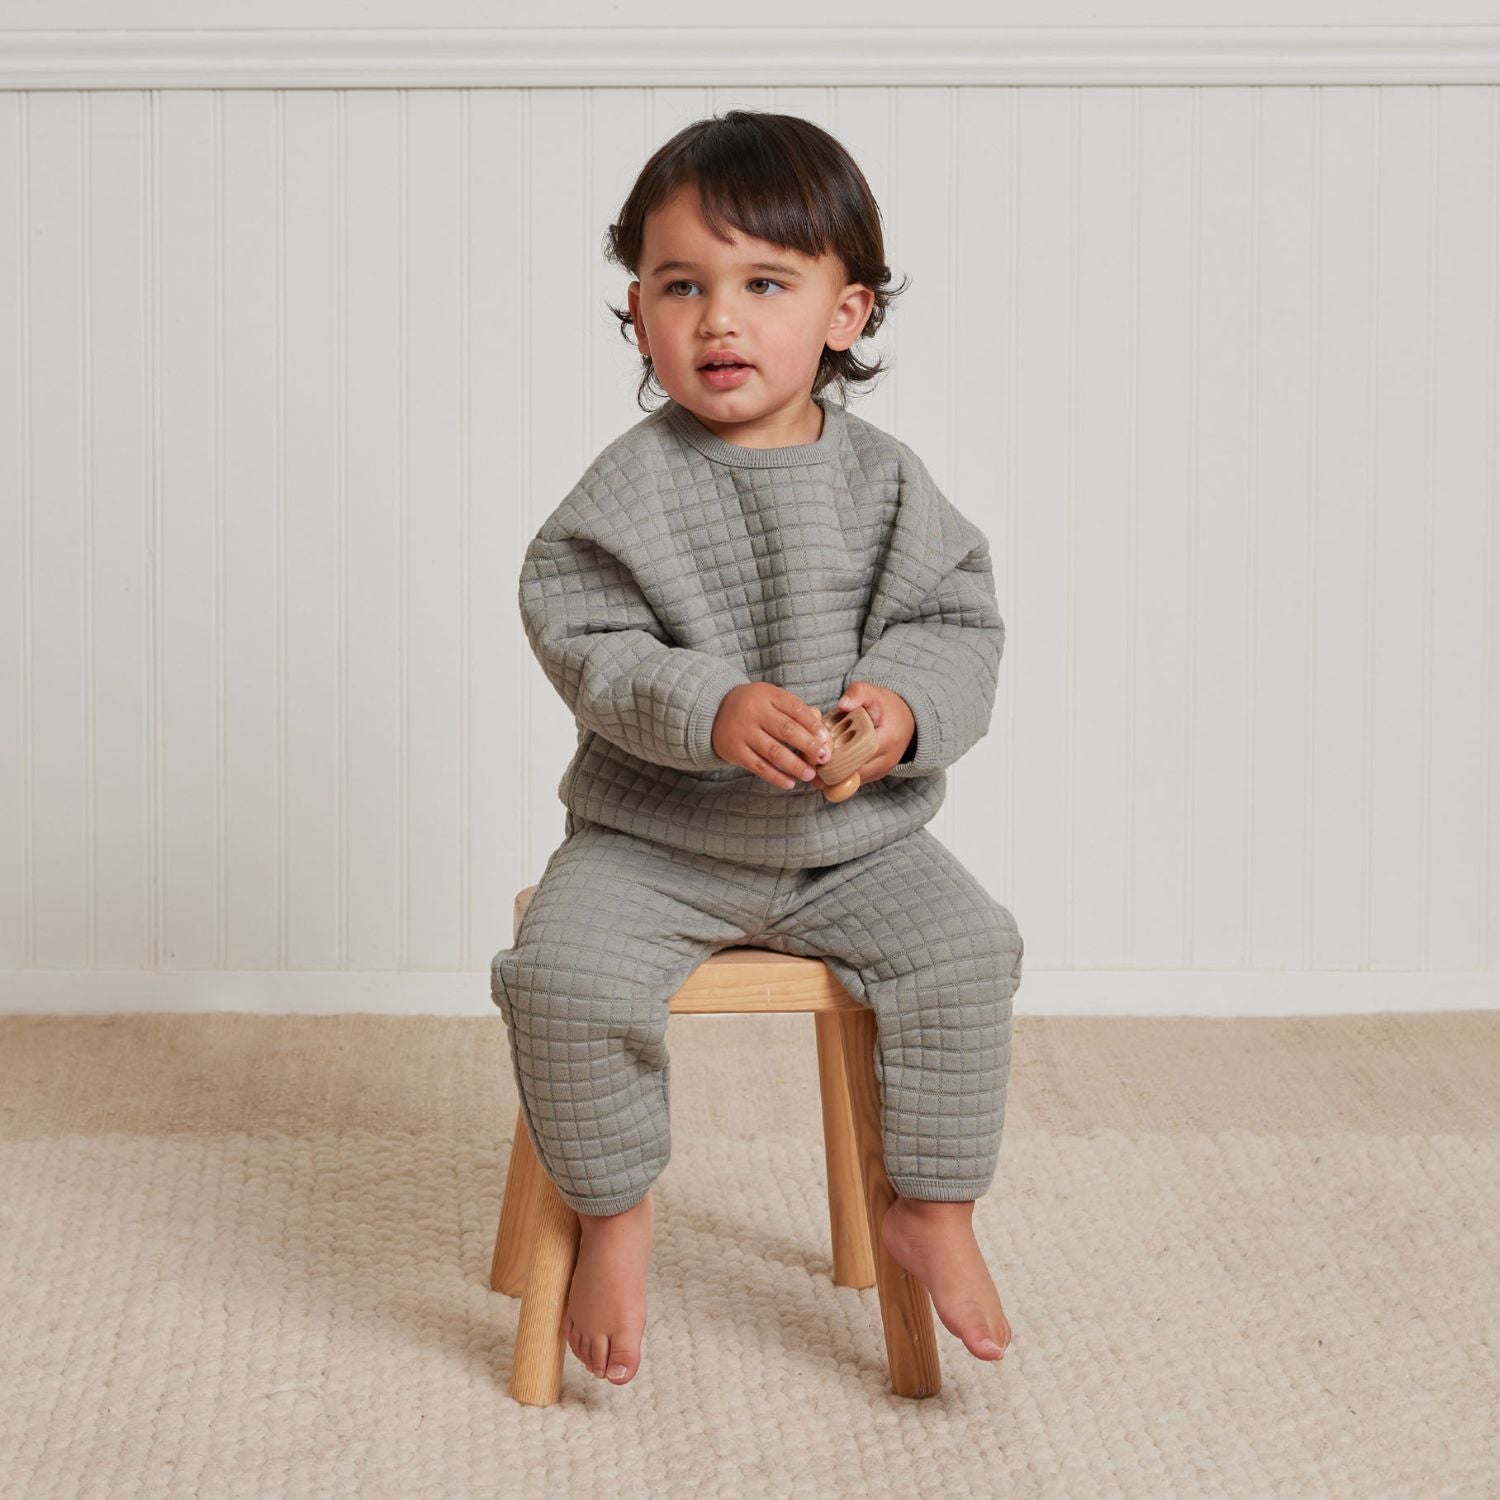 Toddler wearing Quincy Mae Quilted Sweater + Pant Set - Dusty Blue